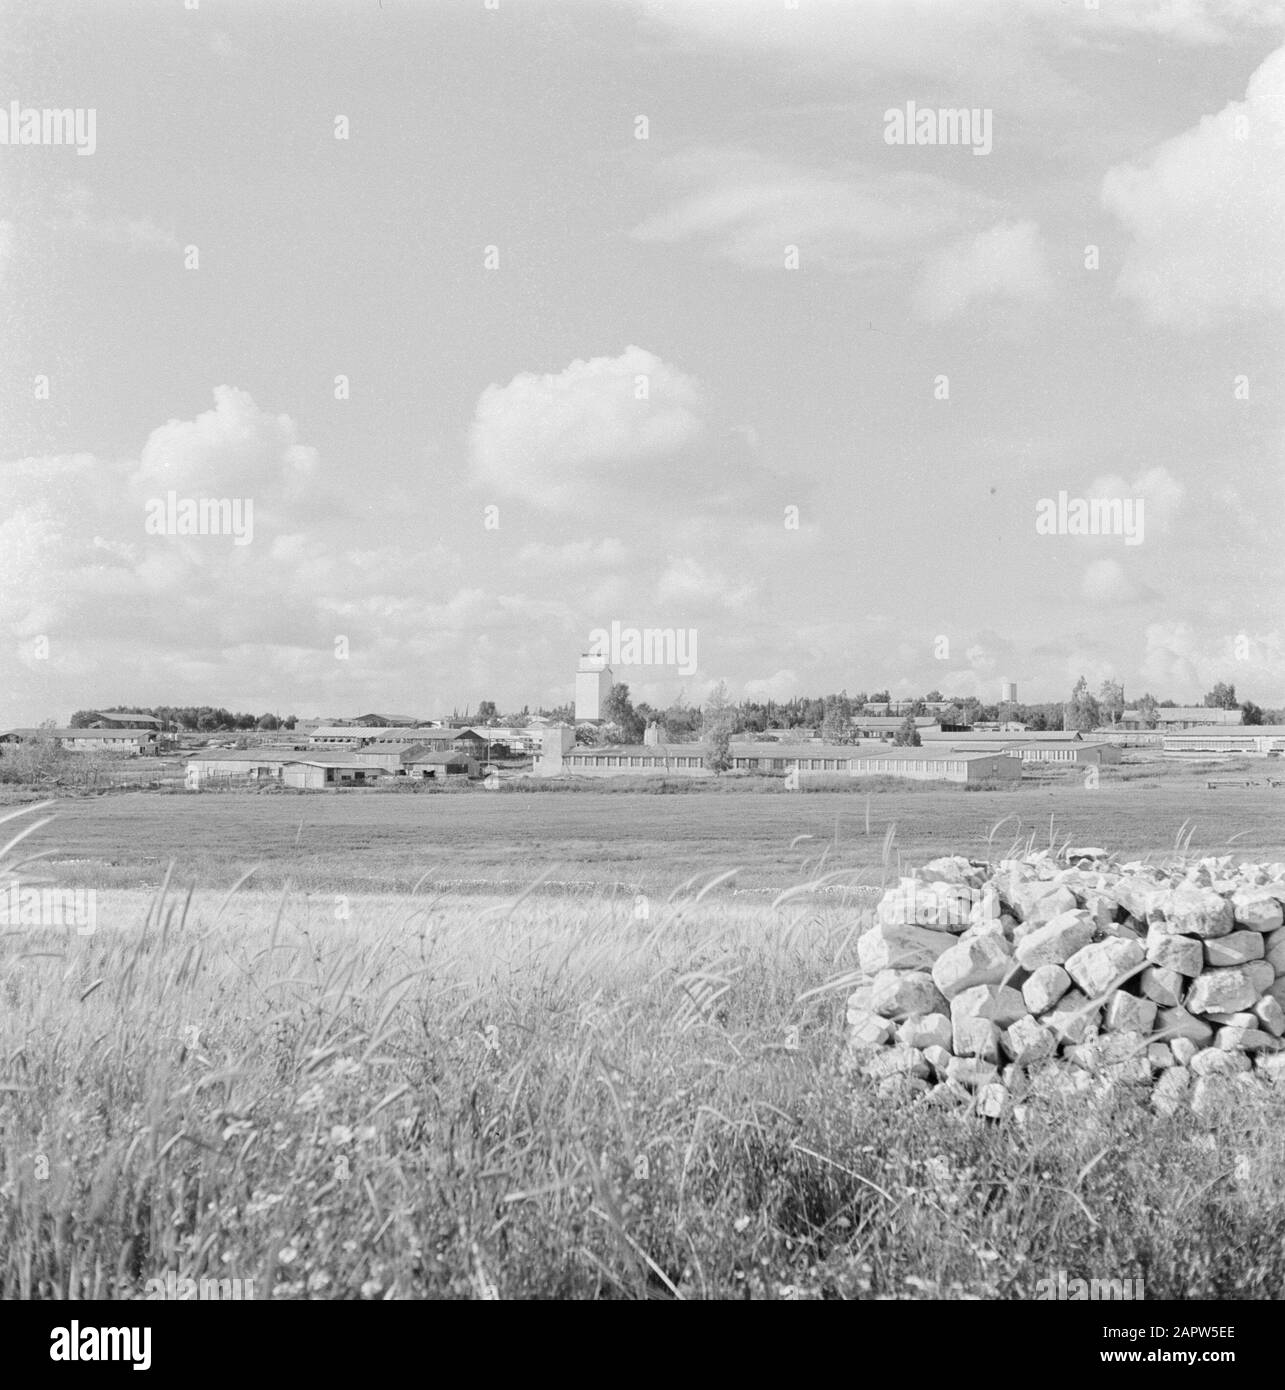 Israel 1964-1965. Gal'ed  Kibbutz Gal'ed. Panorama with the kibbutz in the distance, with in the foreground a field of ripening grain and a heap of stacked stones Annotation: Gal'ed (also called Even Yitzhak) is a kibbutz in northern Israel, located in the plain of Menasse. Date: January 1, 1960 Location: Gal'ed, Israel Keywords: fields, cereals, kibbutz, panoramas Stock Photo